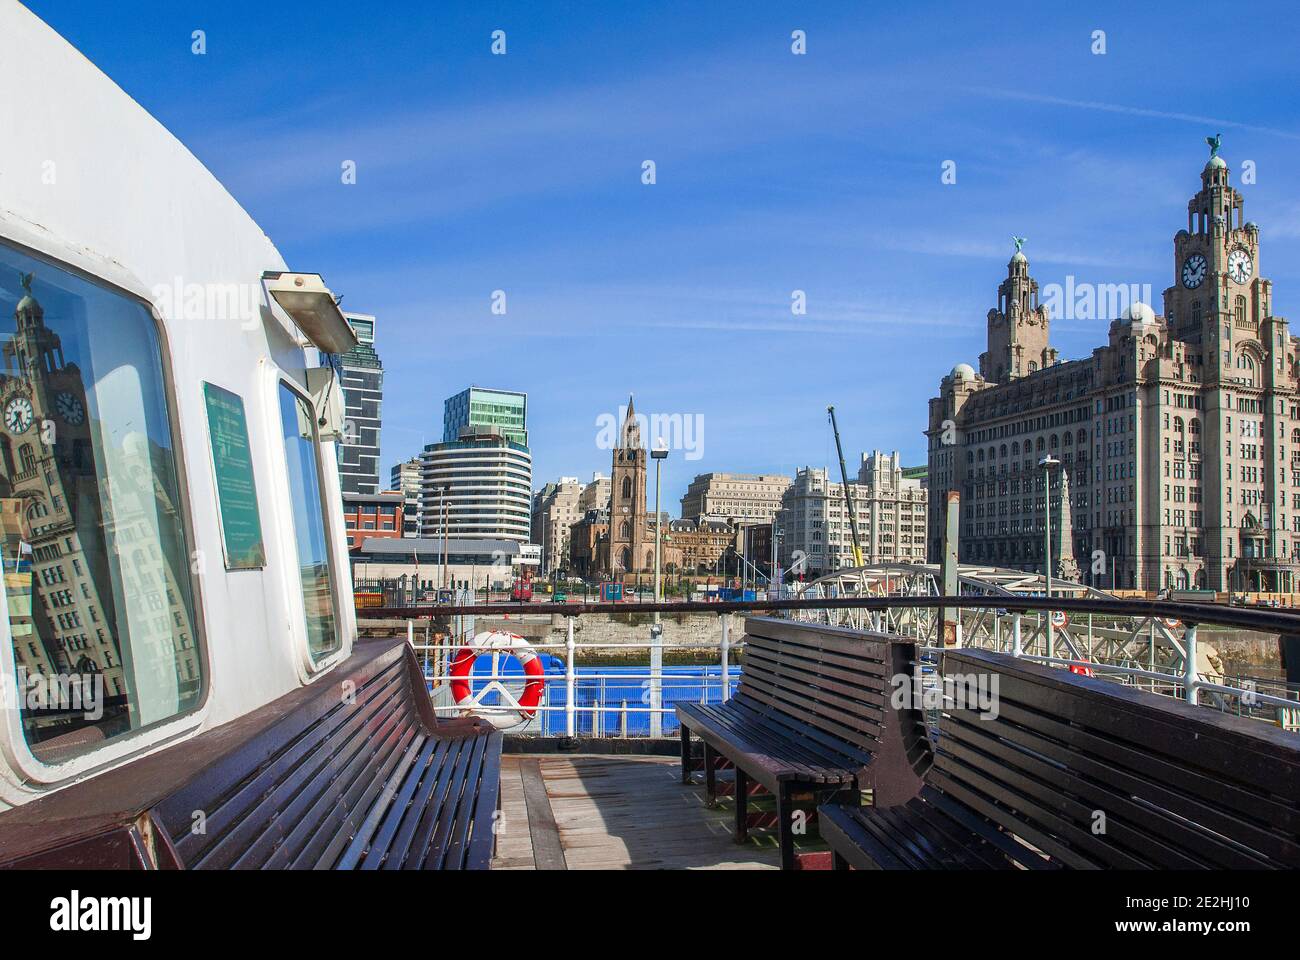 A Mersey ferry pictured berthed at the Liverpool Pier Head with the Parish church of St. Nicholas and the Royal Liver building in the background. Stock Photo